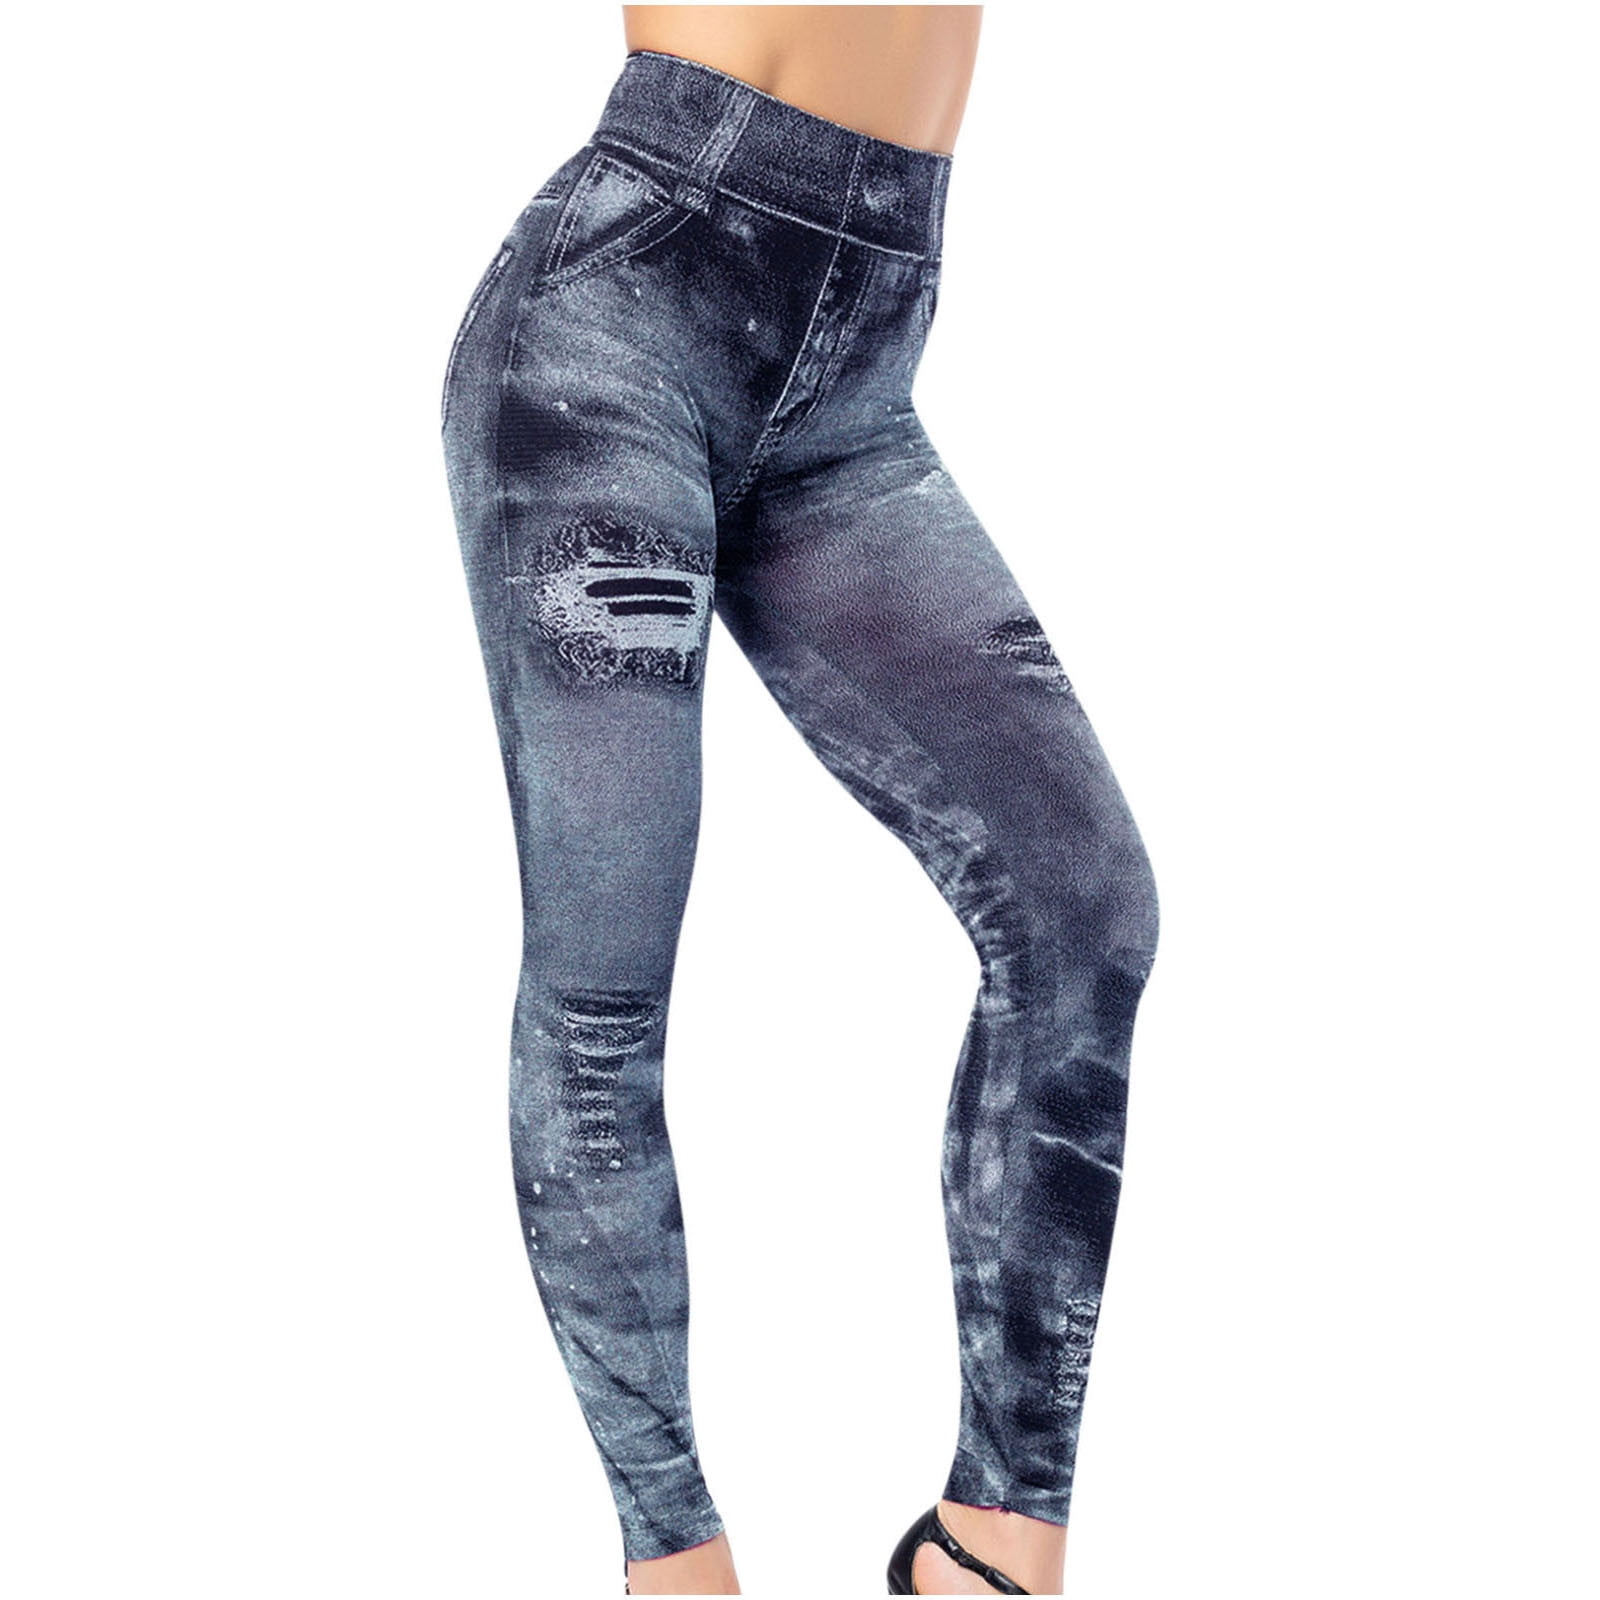 YYDGH Leggings for Women Distressed Ripped Denim Jeggings High Waist Tummy  Control Yoga Pants Stretchy Skinny Jeans Tights Navy Blue M